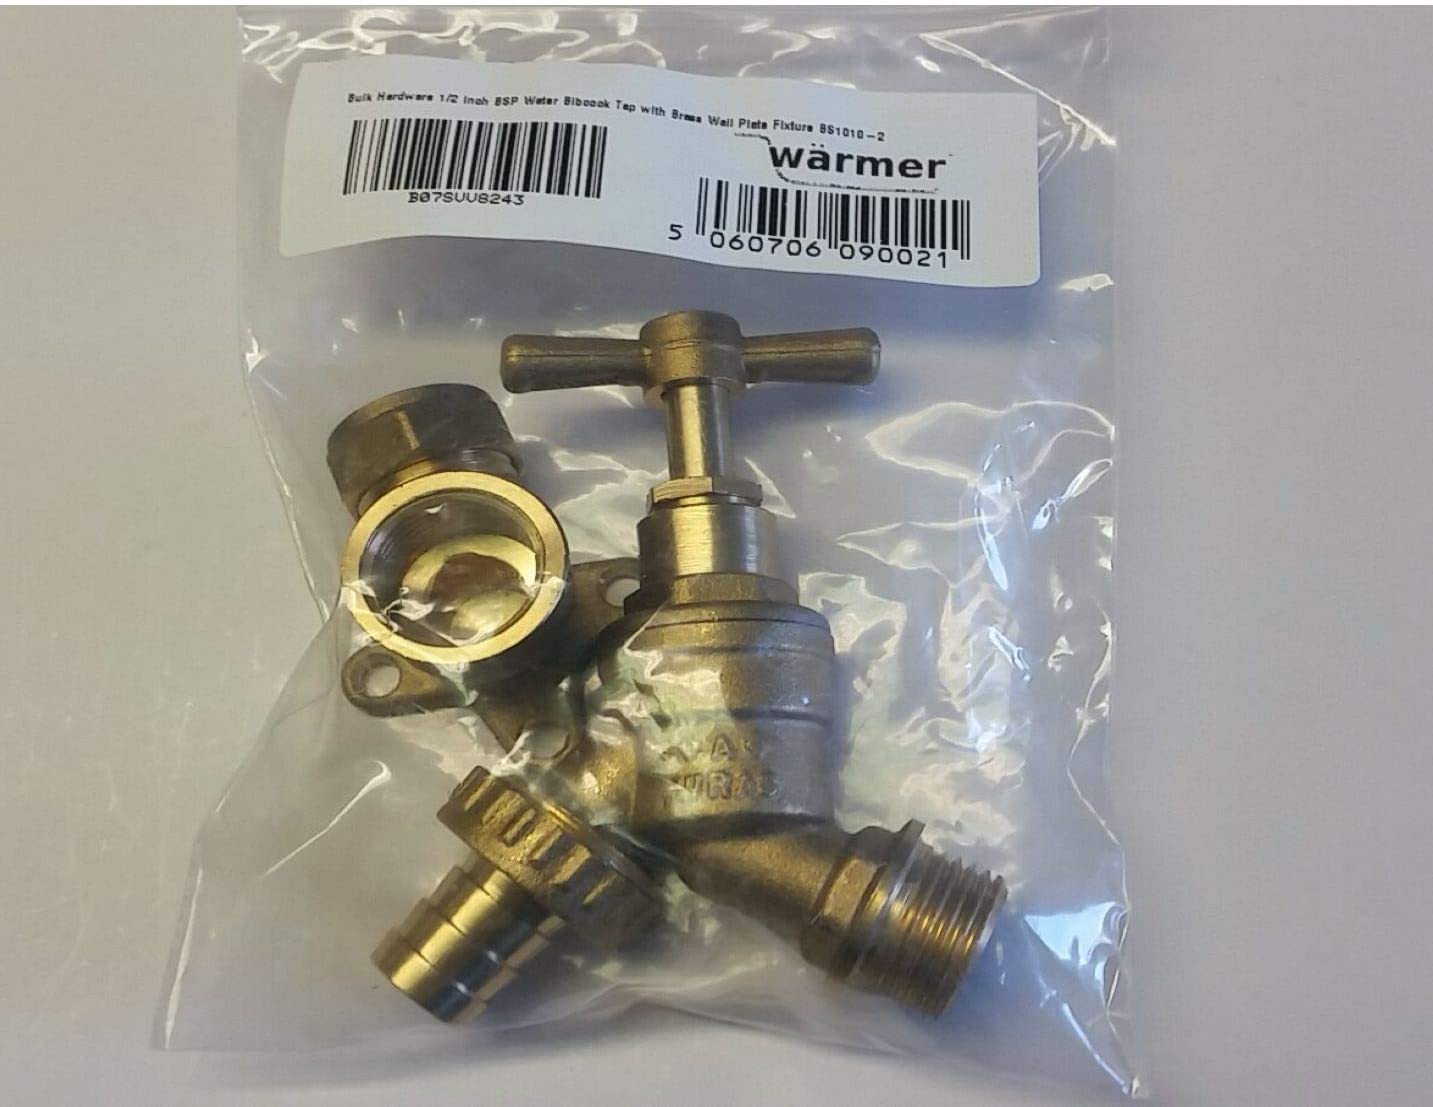 Details about   1/2 inch BSP Water Taps with Brass Wall Plate Fixture BS1010-2 .. 